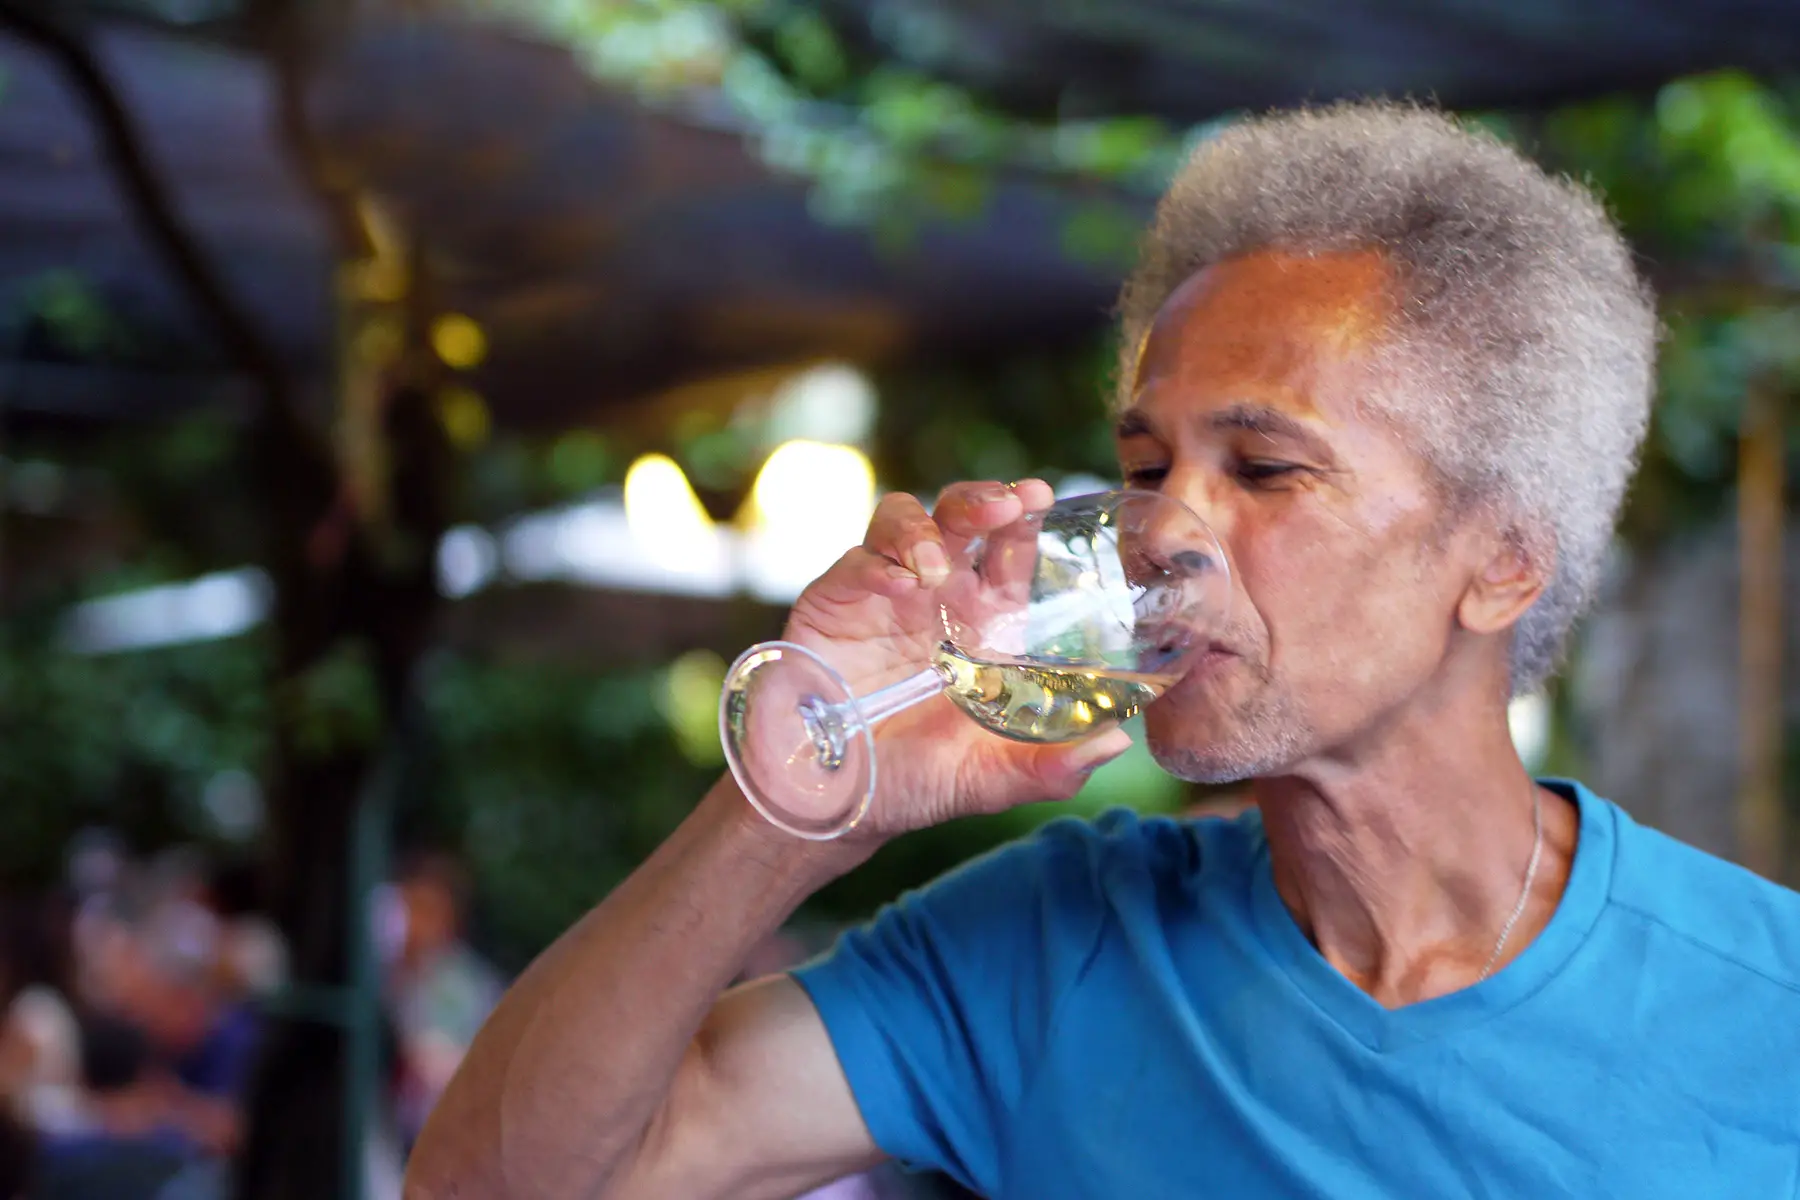 A man with grey hair sipping a white wine and looking happy